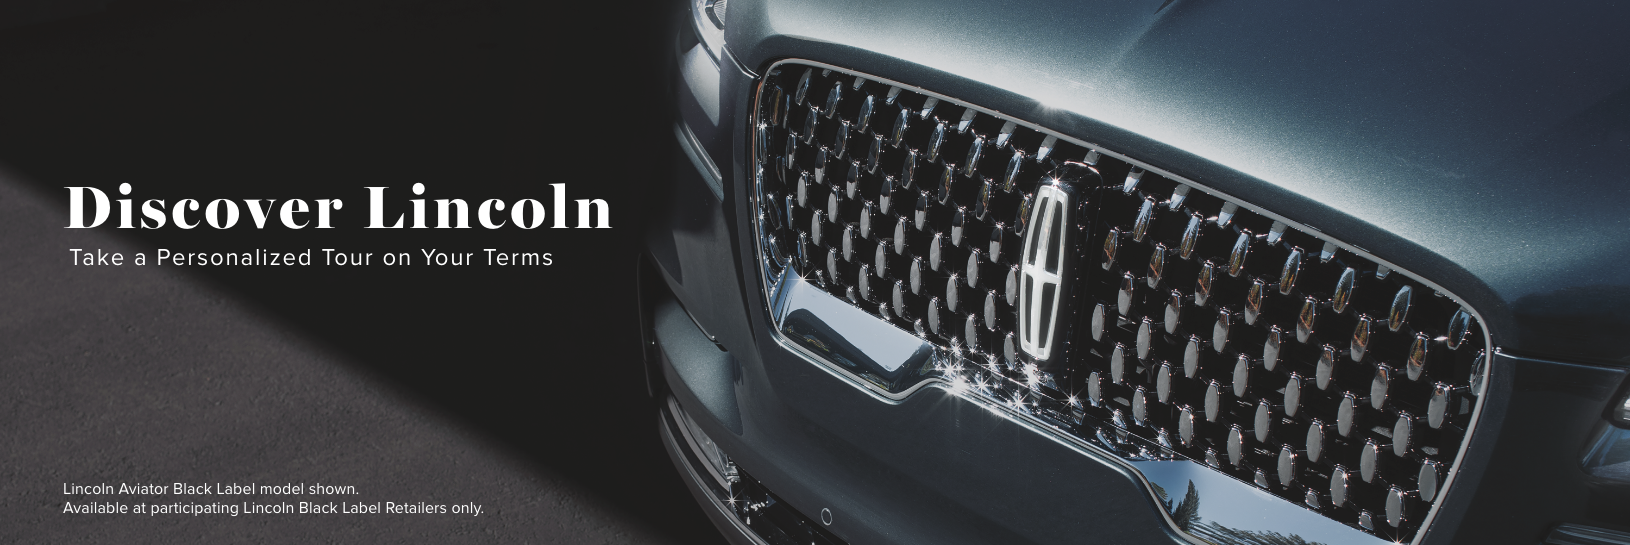 The Lincoln® Black Label Aviator grille is shown with raised Lincoln® star logo shapes surrounding the center Lincoln® emblem